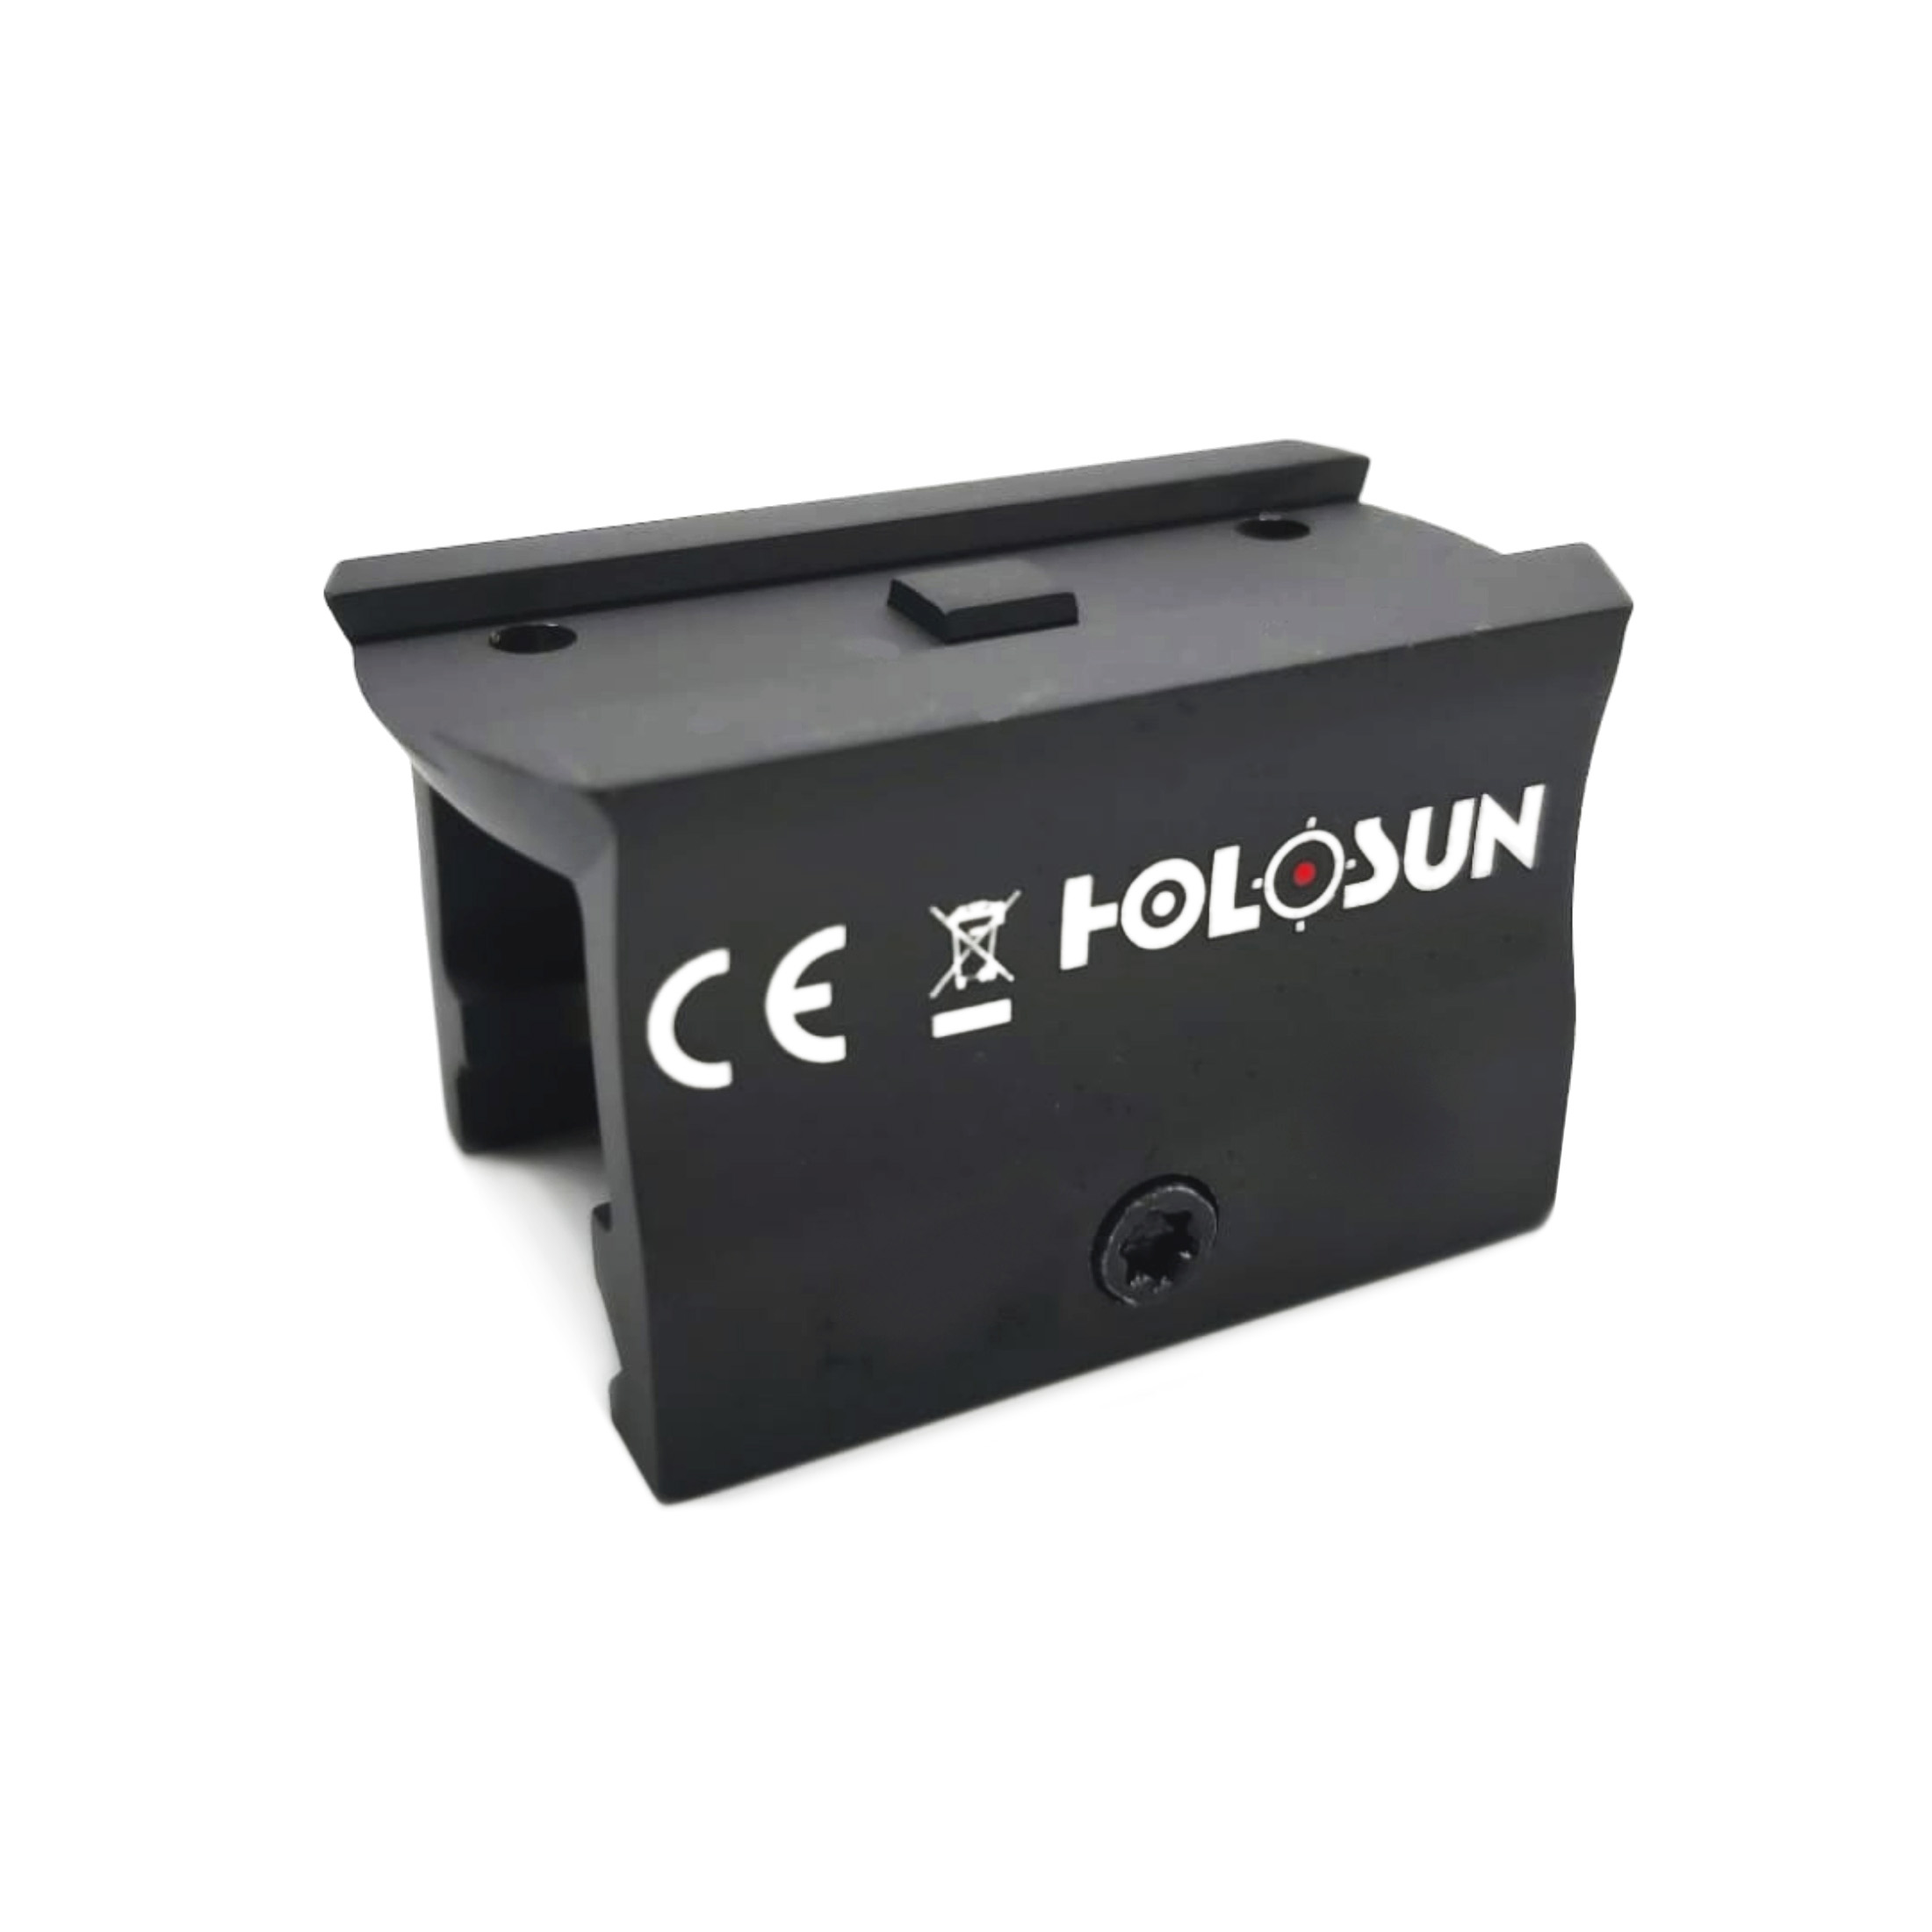 Holosun high mount 1.2 Inch, accessory for Holosun red dot sight 403R